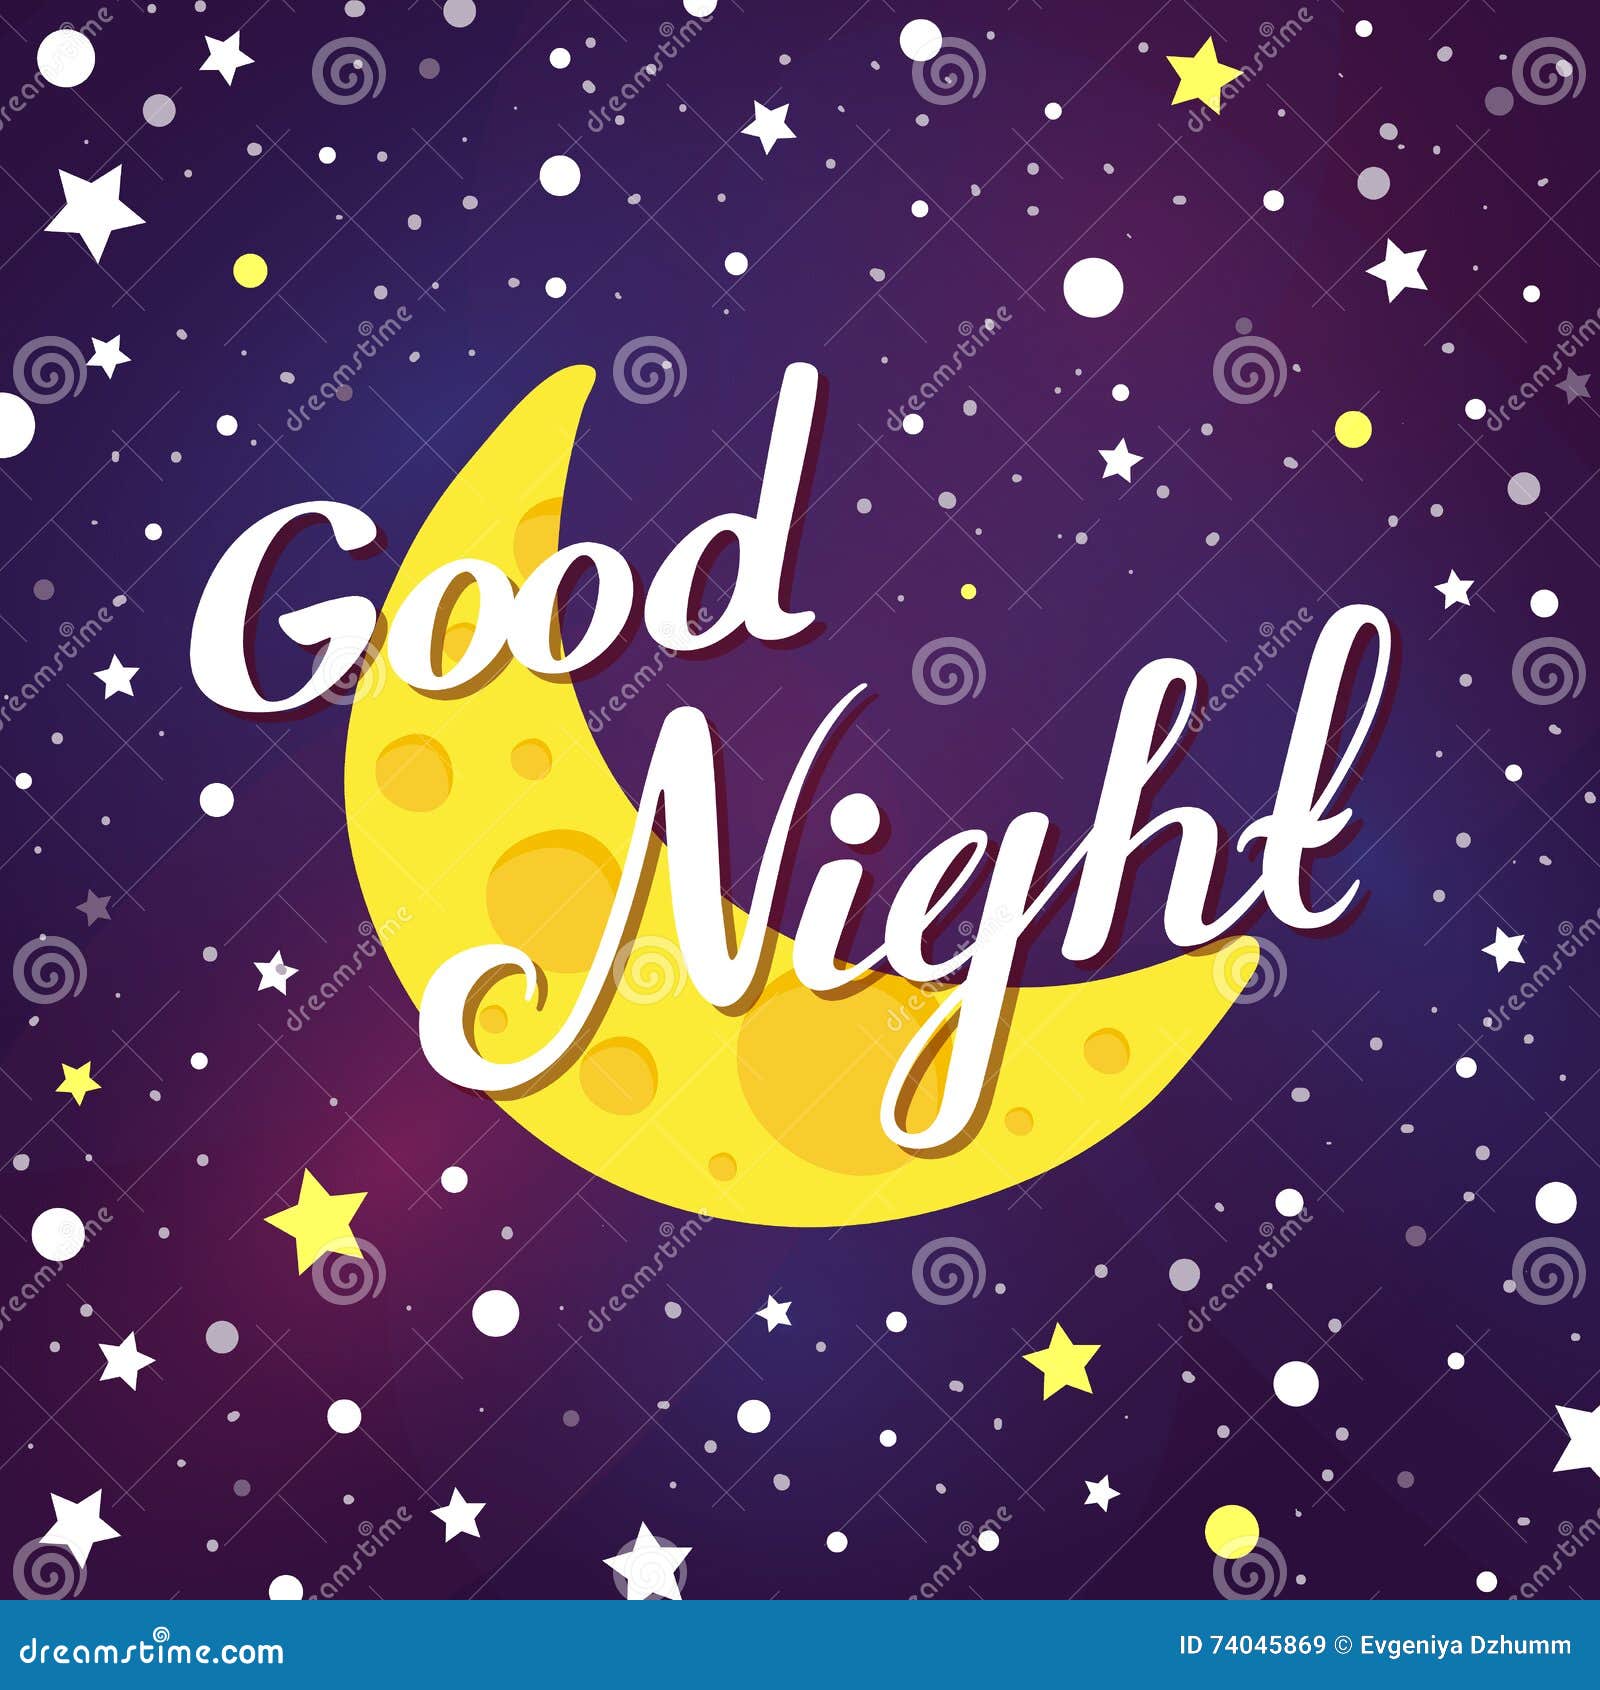 Vector Illustration Of Good Night Lettering On Dark Sky With Moon And ...